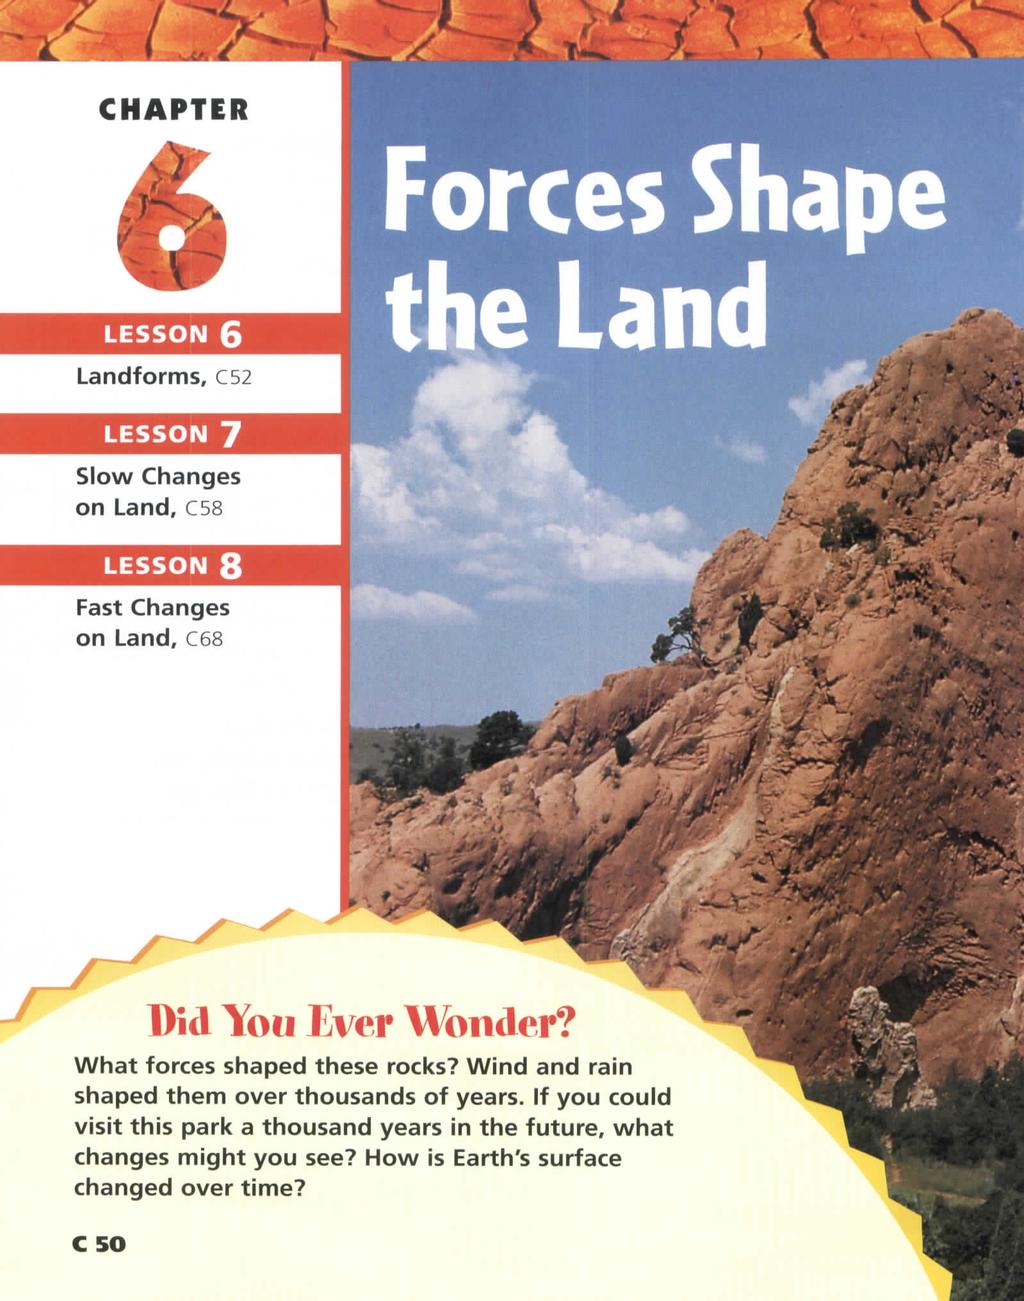 \ - i -Vt1 t _ 9 \ "» y \R Landforms, C52 Slow Changes on Land, C58 Fast Changes on Land, C68 w -4 Did You Ever Wonder? What forces shaped these rocks?